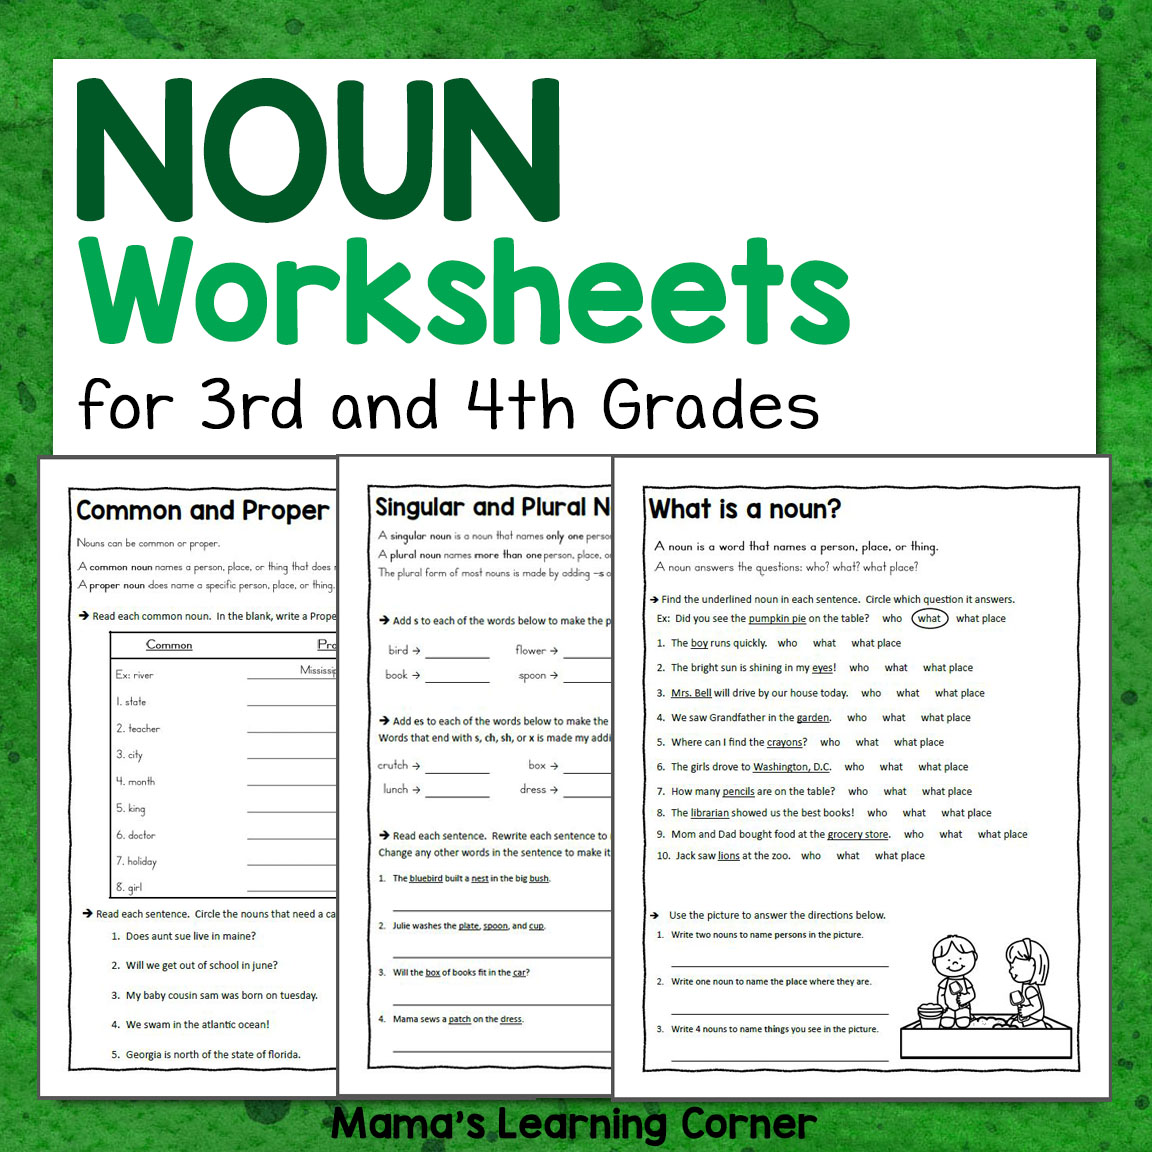 Noun Worksheets for 3rd and 4th Grades